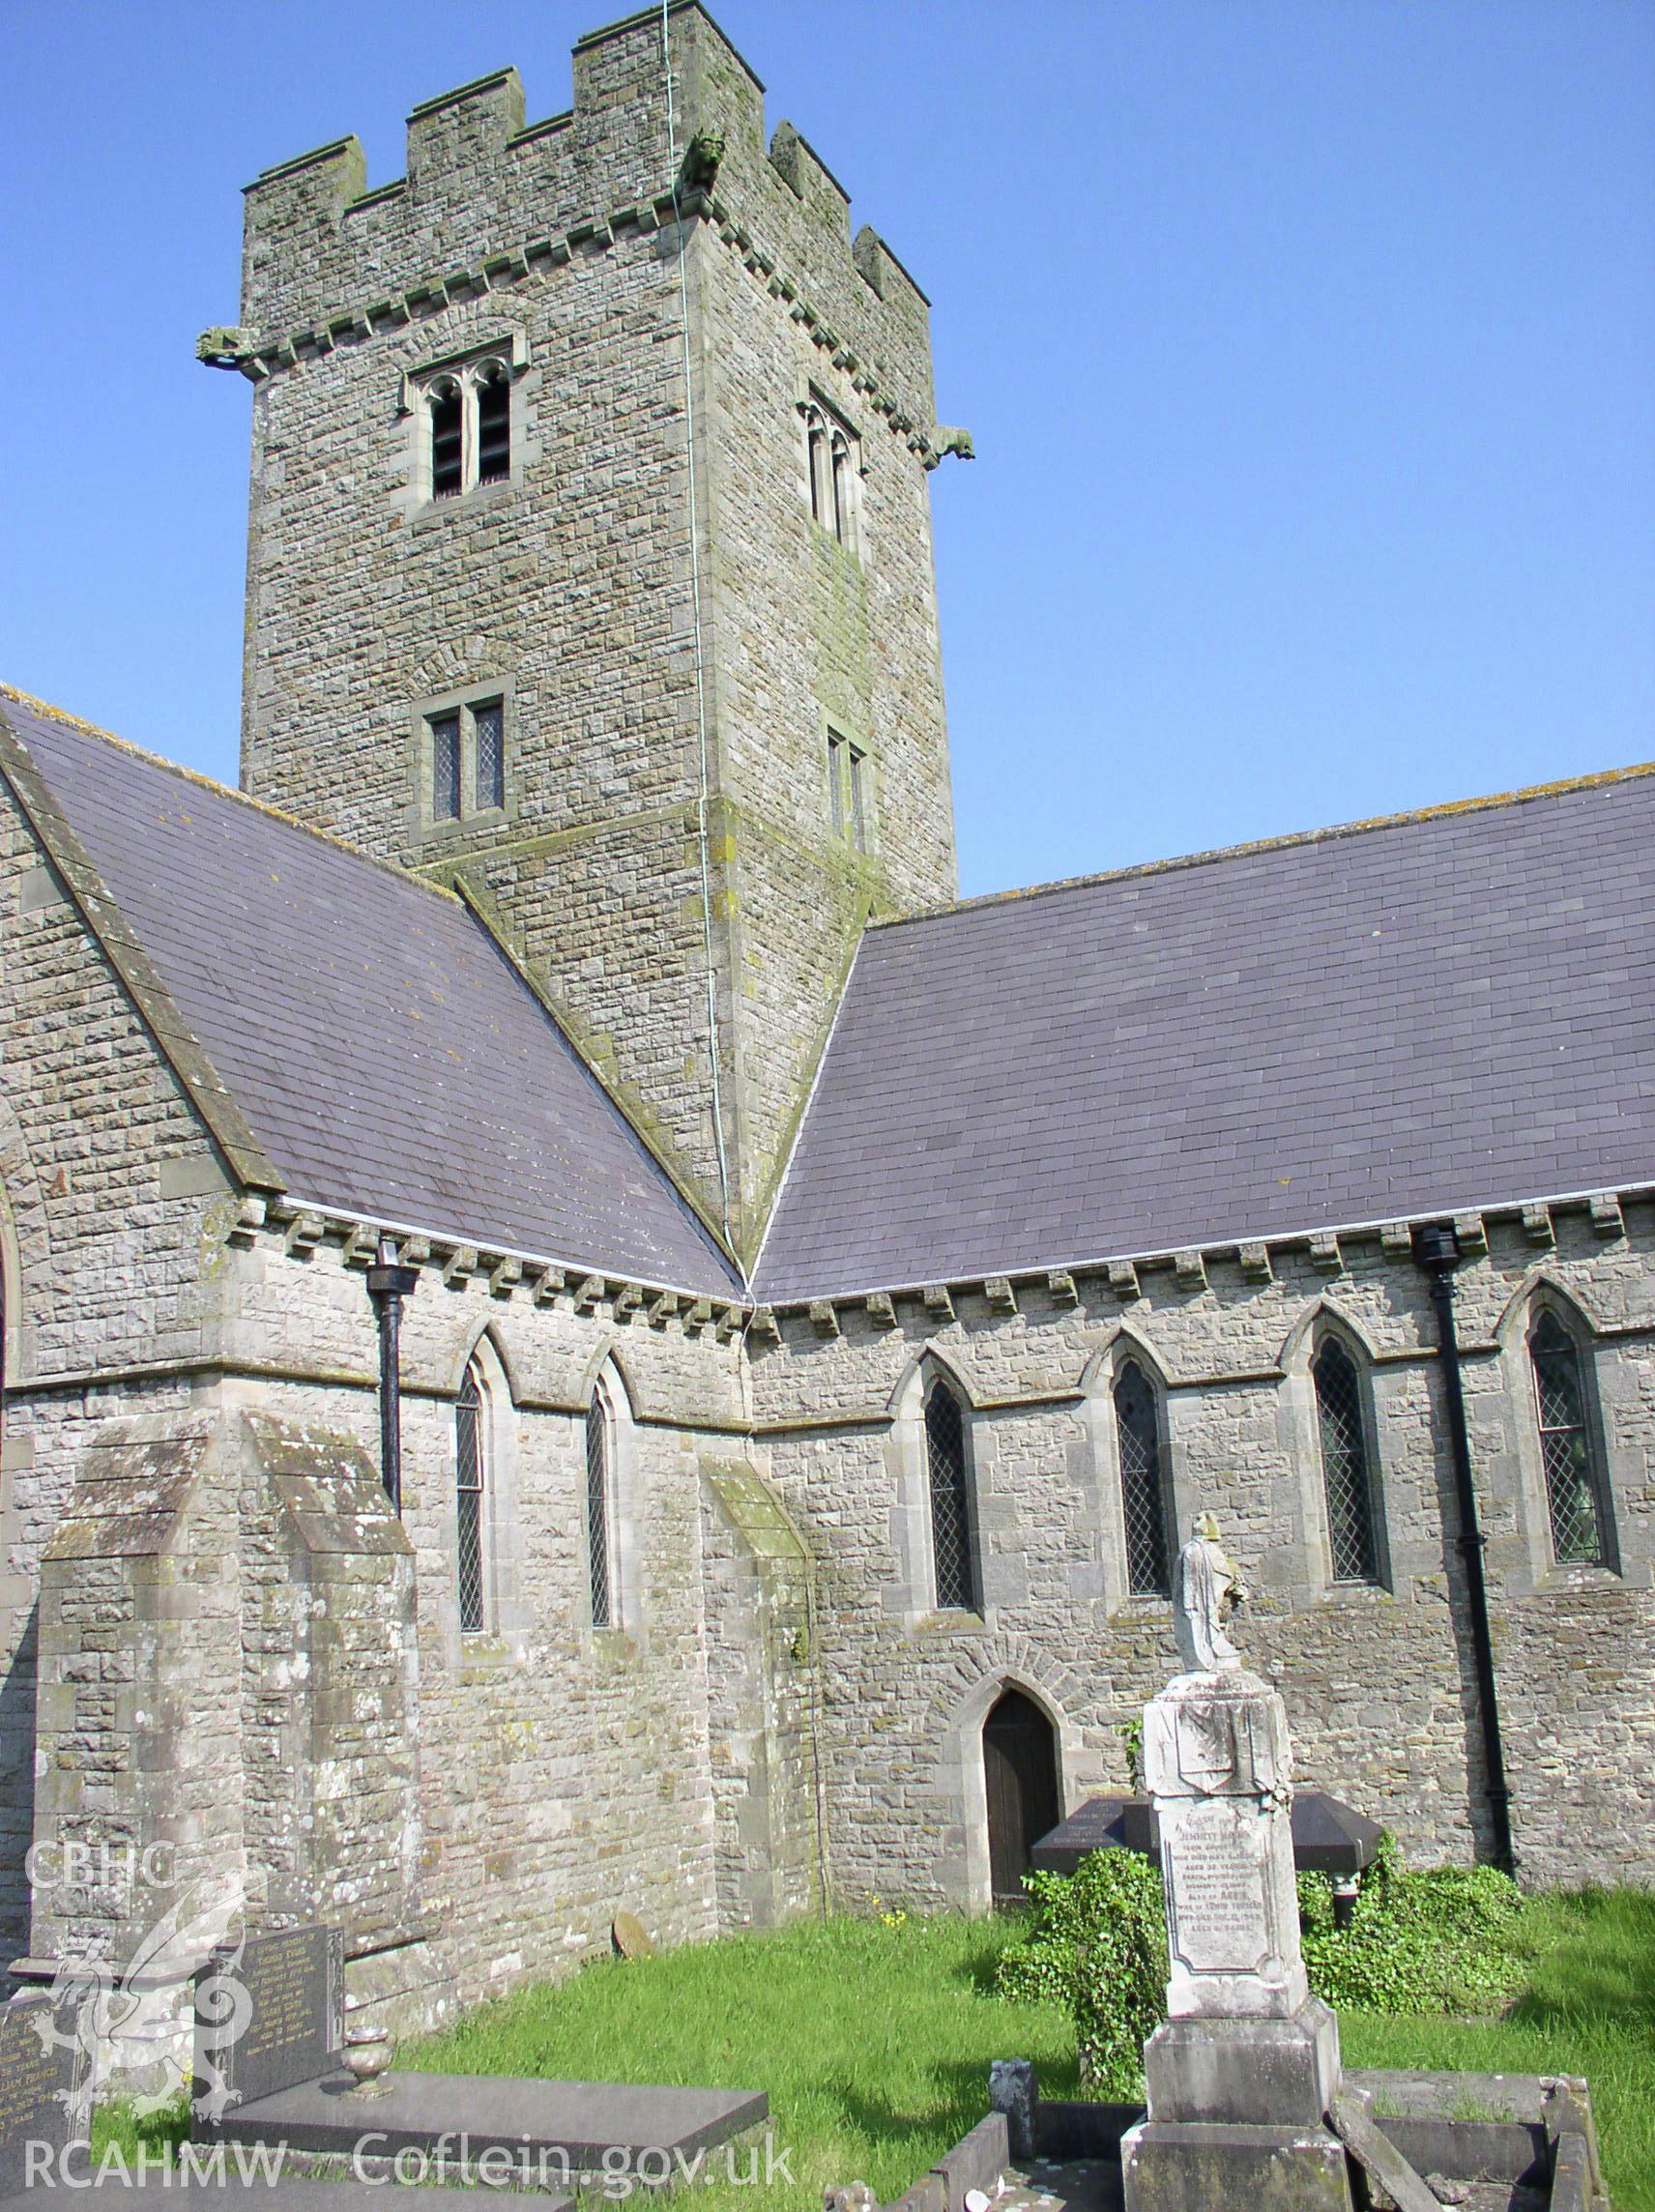 Colour digital photograph showing the exterior of St. Crallo's Church, Coychurch.